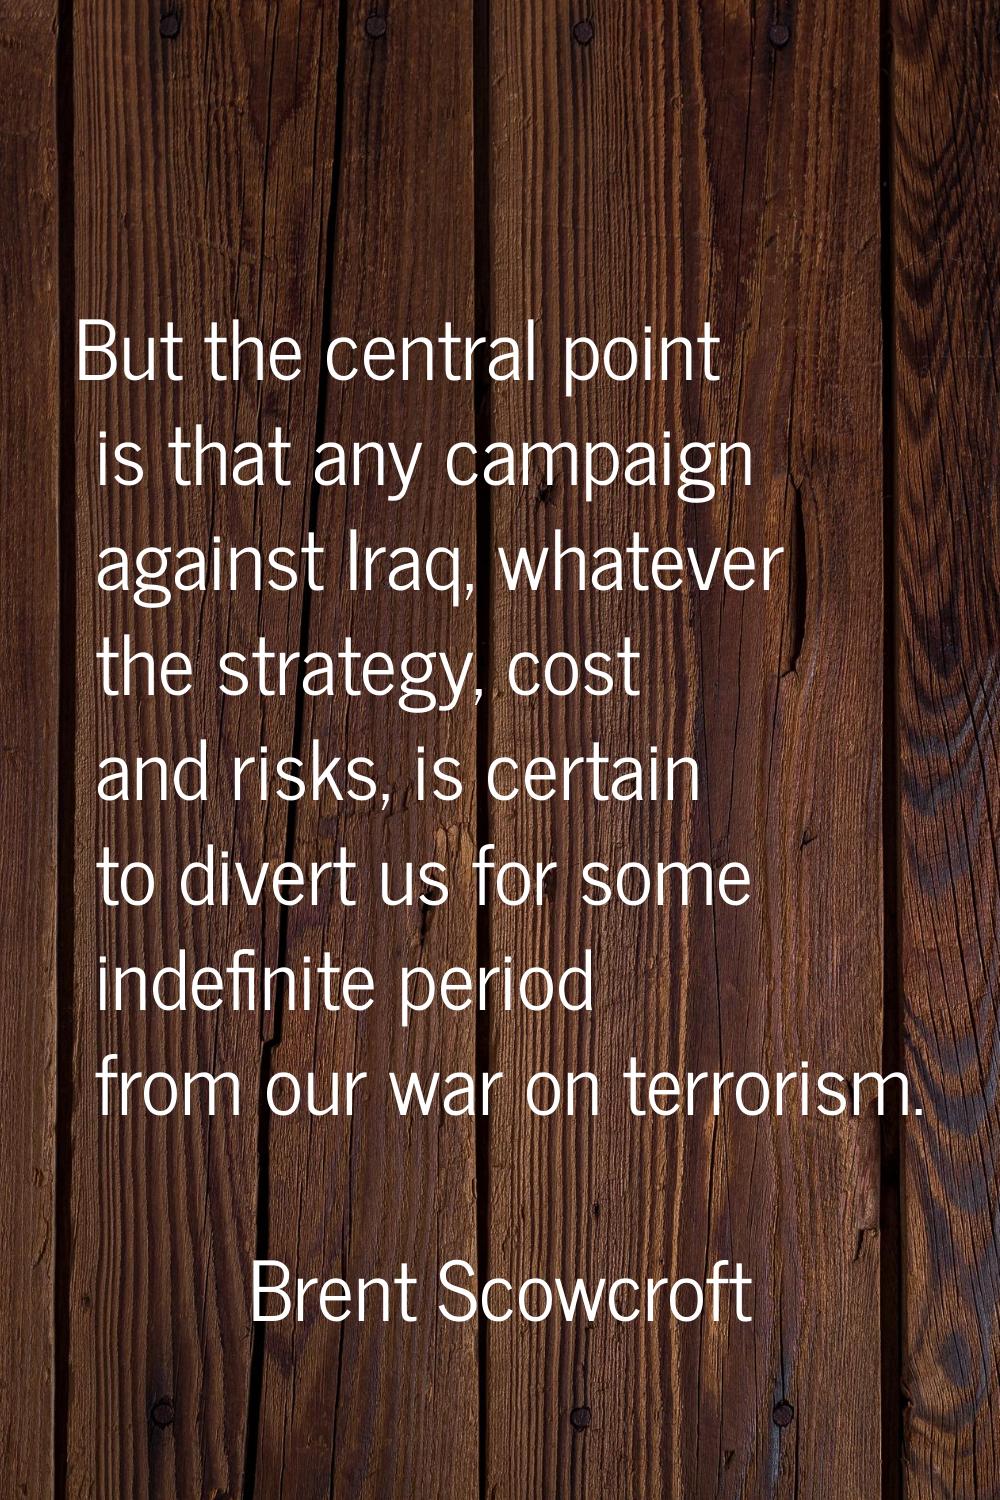 But the central point is that any campaign against Iraq, whatever the strategy, cost and risks, is 